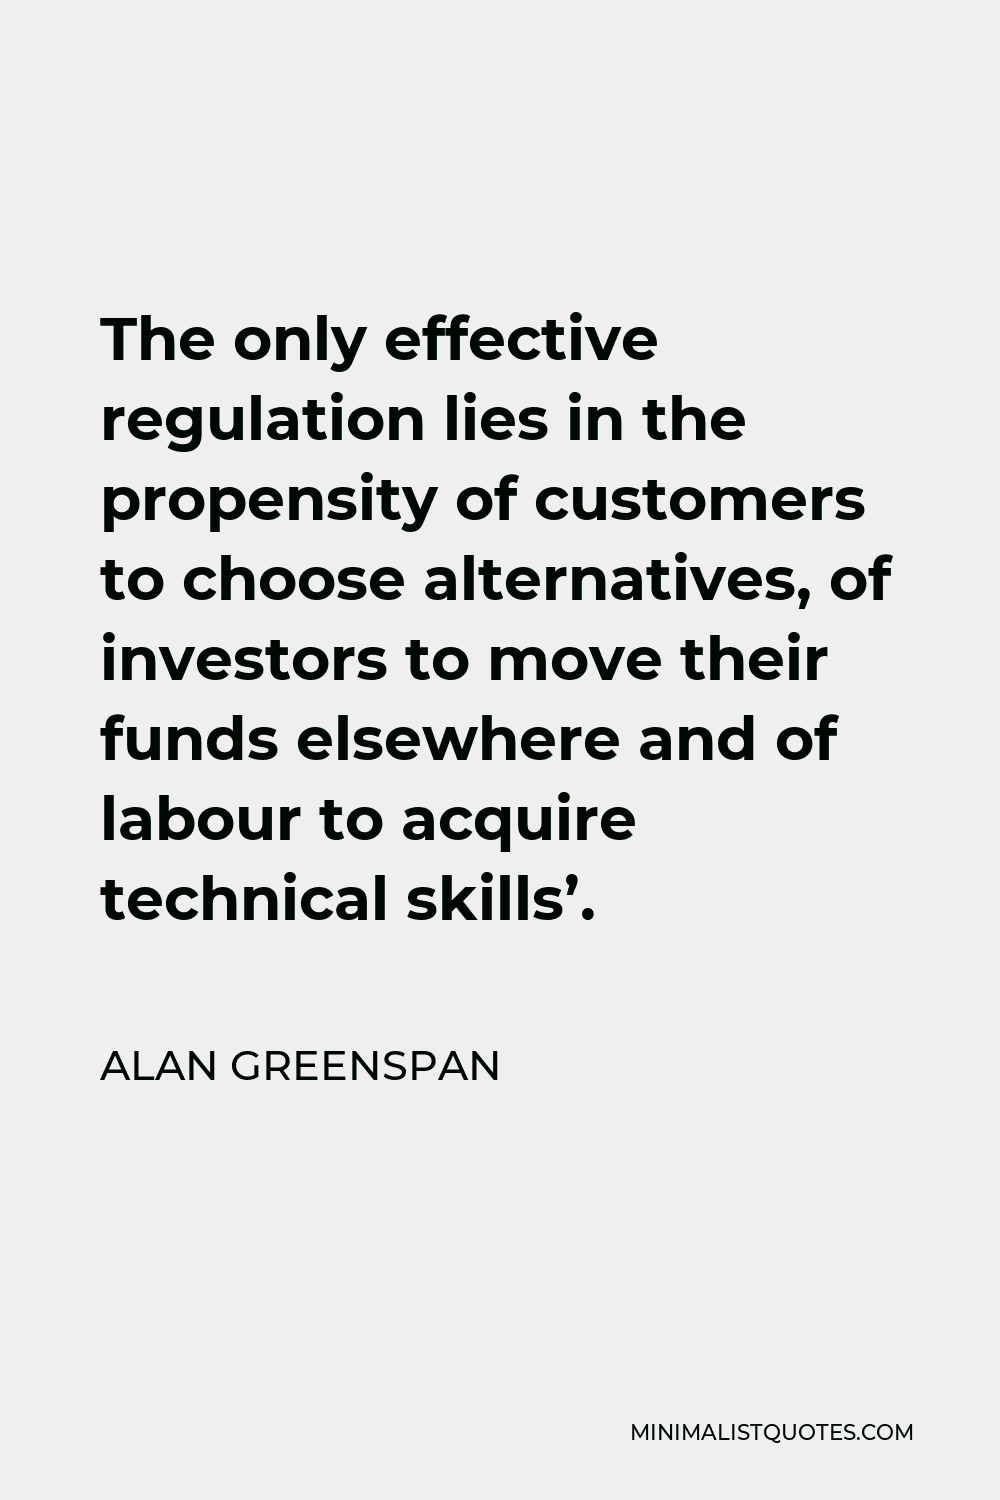 Alan Greenspan Quote - The only effective regulation lies in the propensity of customers to choose alternatives, of investors to move their funds elsewhere and of labour to acquire technical skills’.